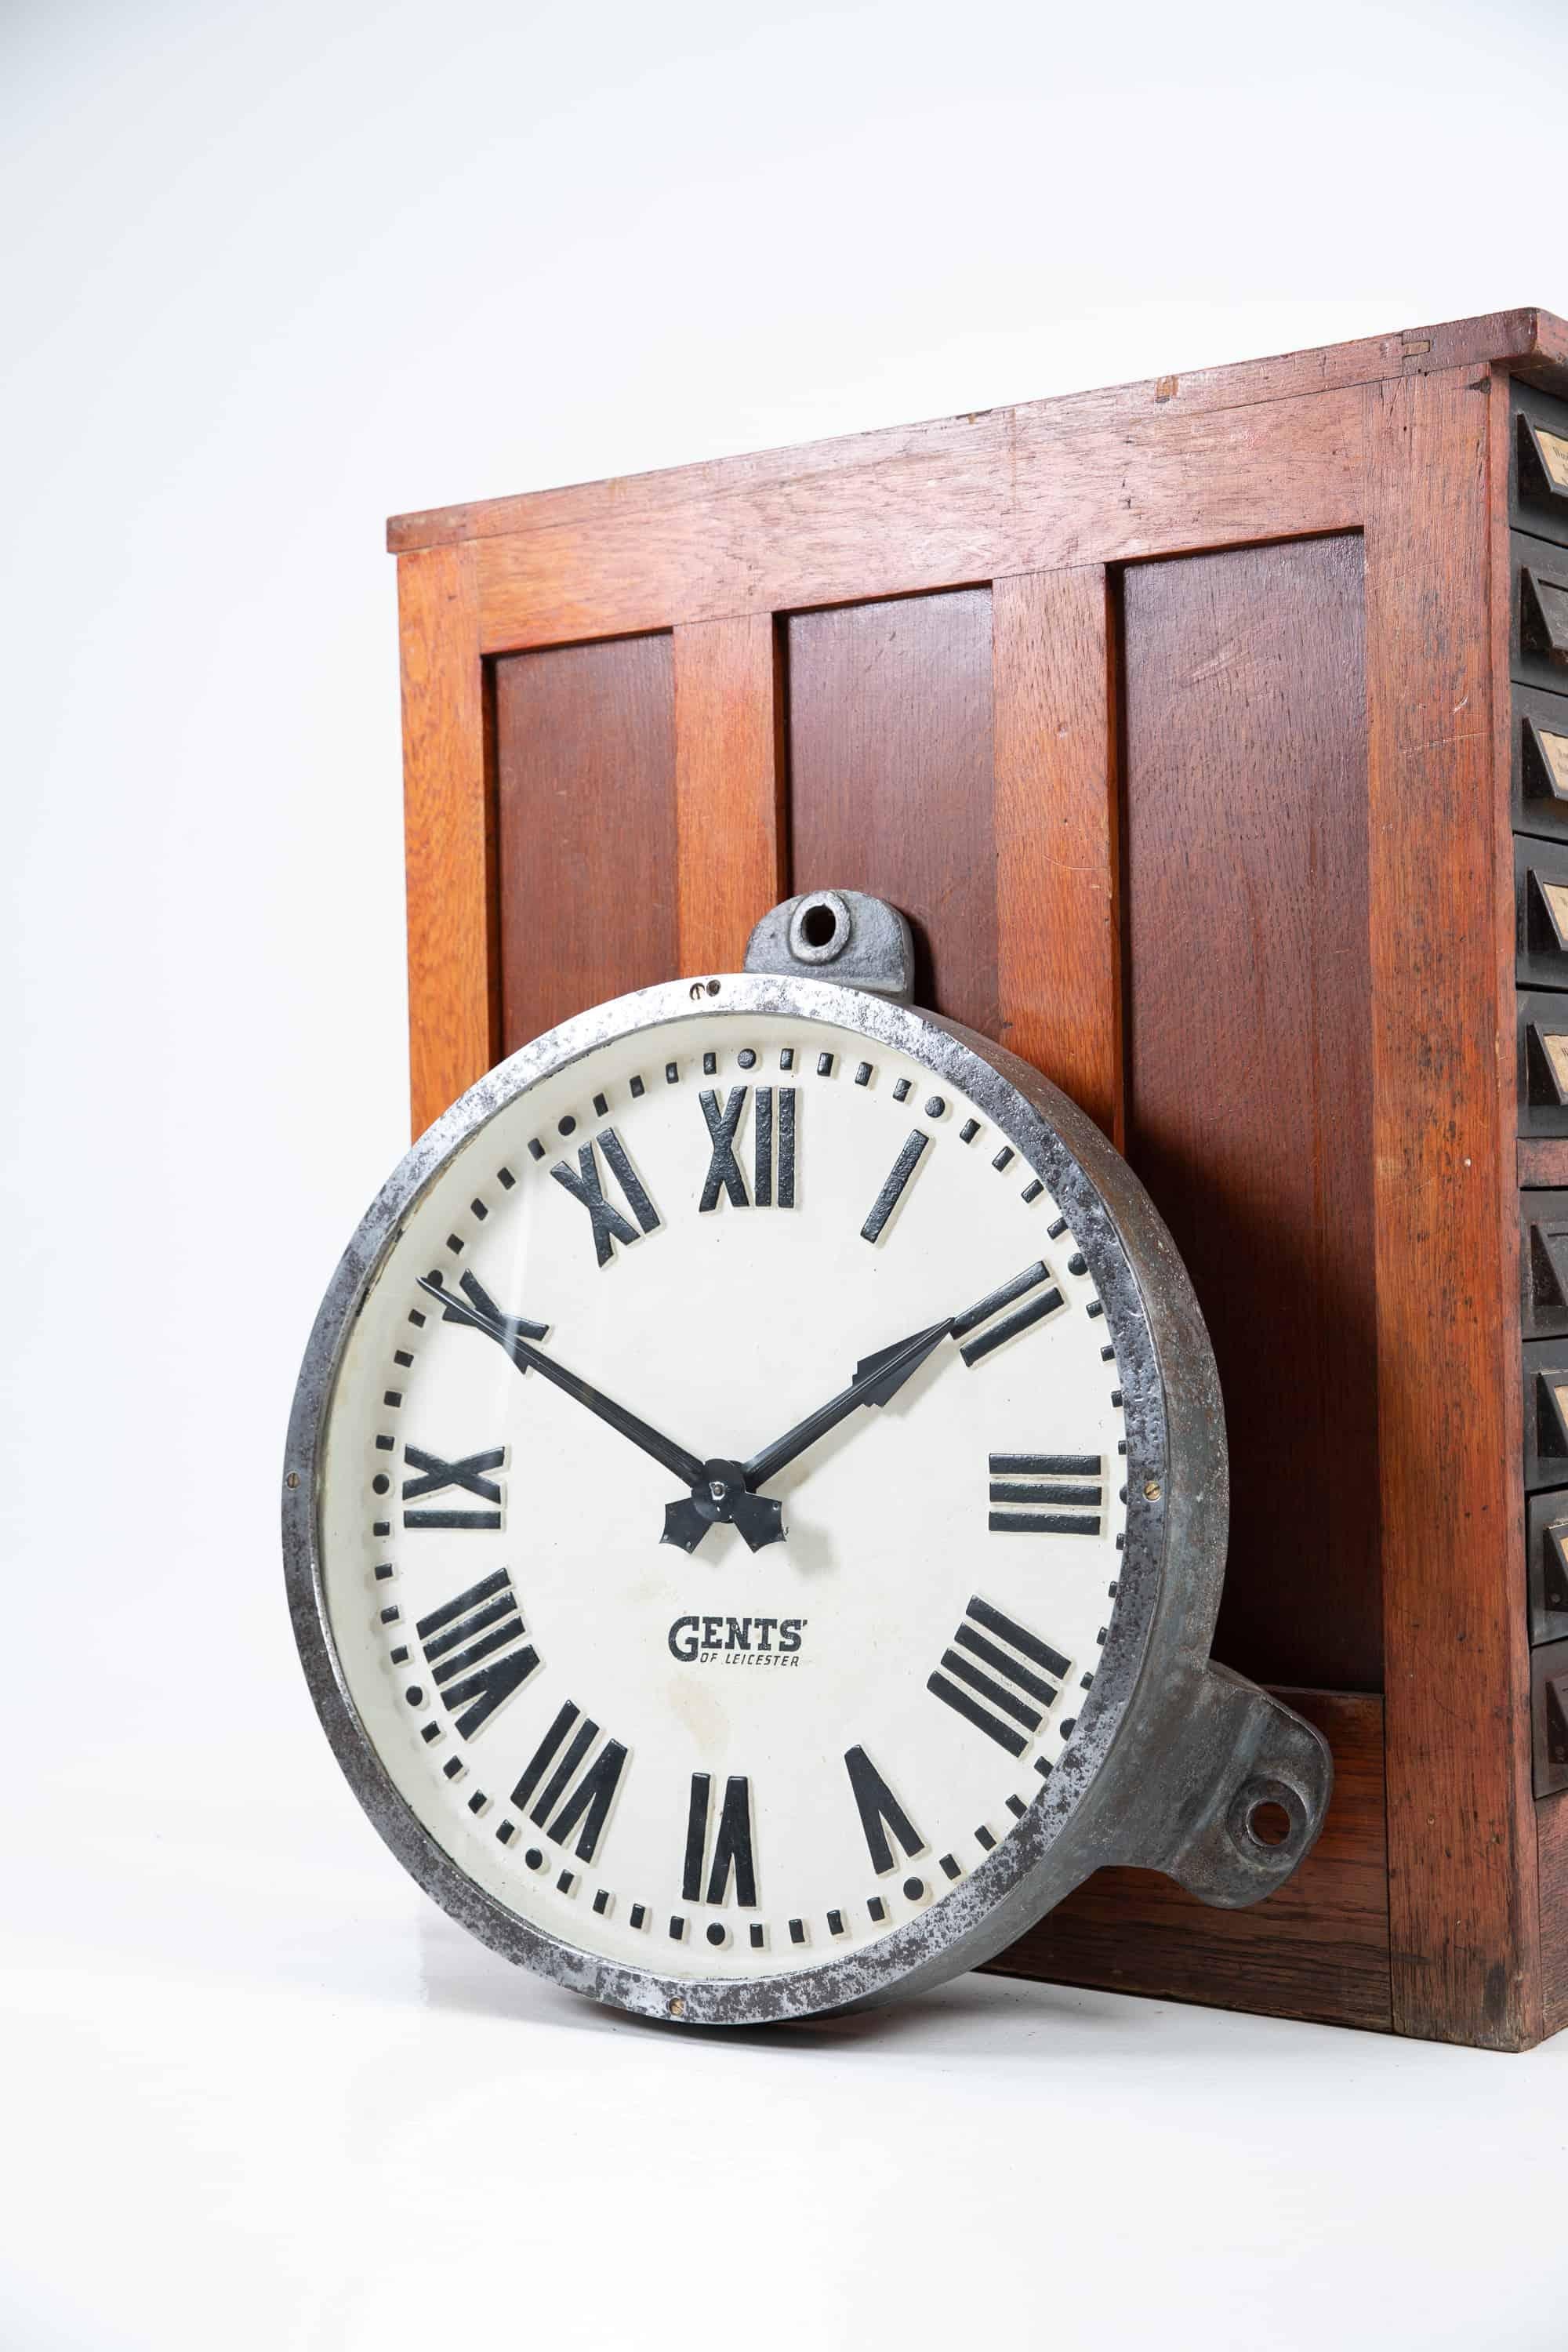 Incredible large 18” cast iron factory clock manufactured by renowned electrical company Gents of Leicester. c.1930

Once adorning the interior of Guardbridge Paper Mill in Scotland, this clock has been stripped of a previous poor paint job to